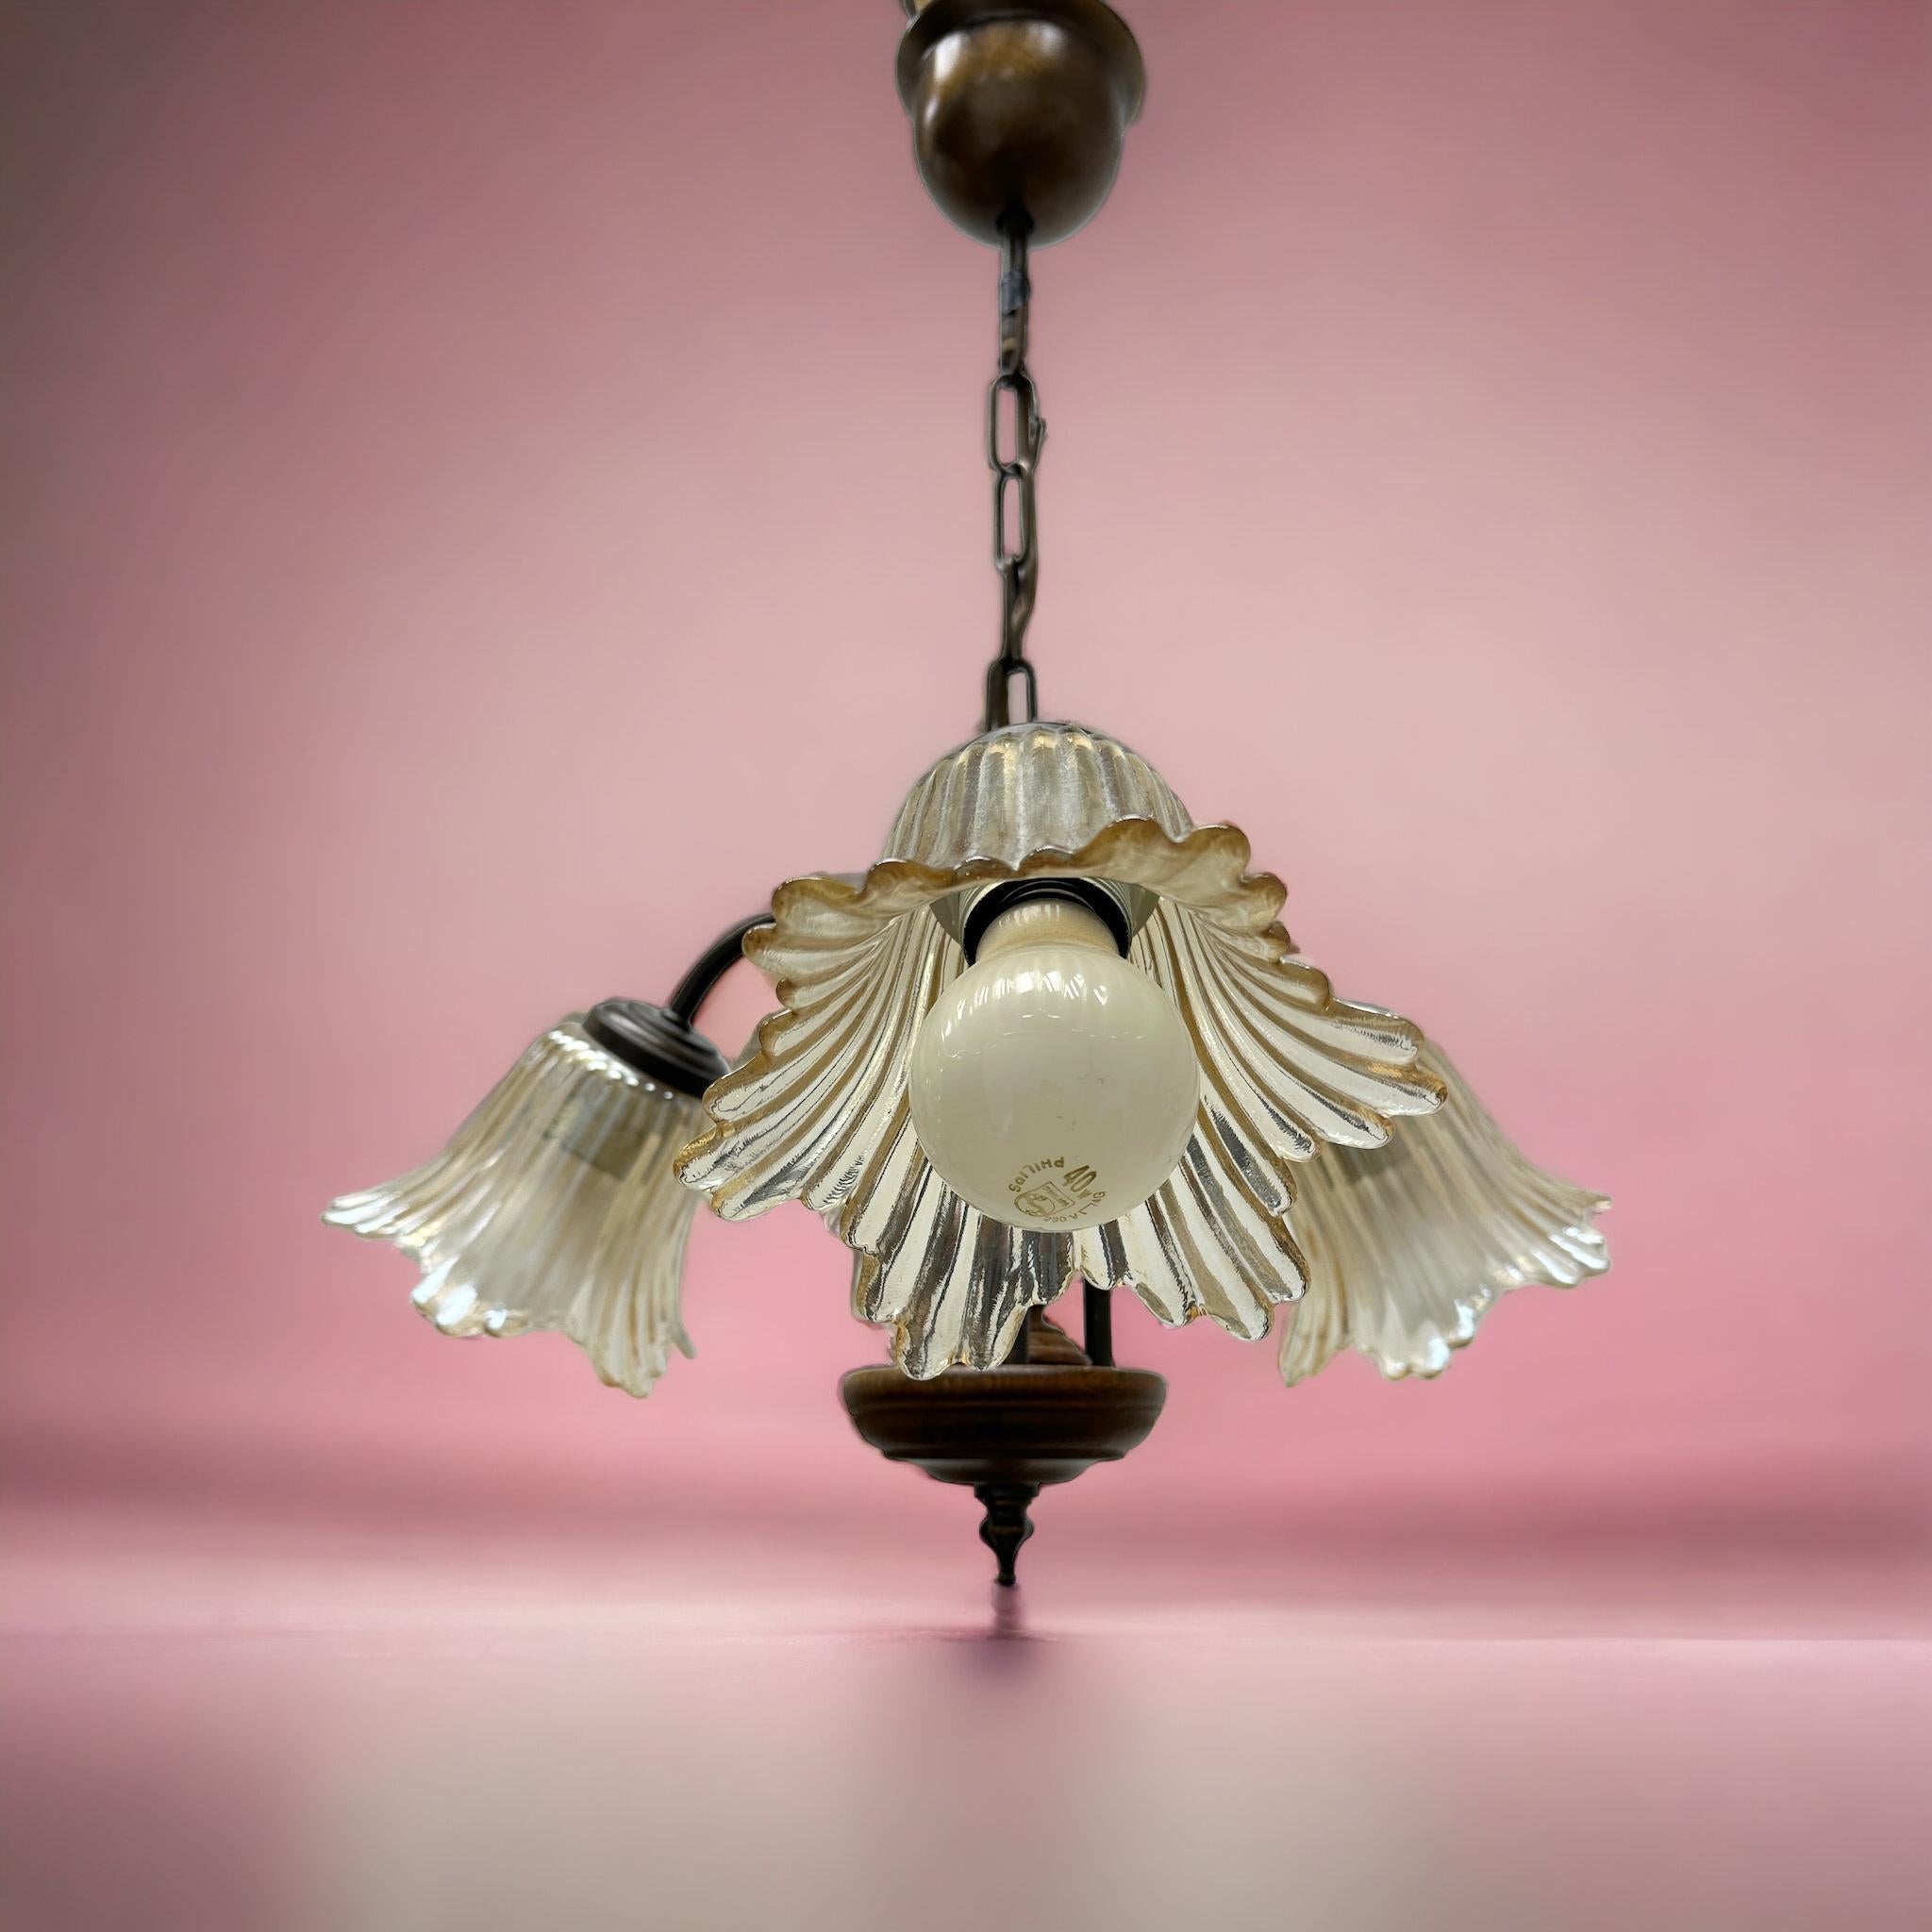 Petite Florentine style three-light chandelier. Functions as is with three E27 / 110 Volt light bulbs. Can take up to 60 Watts each bulb. Beautiful metal chandelier with flower glass shades. It gives a very warm light and represents the Italian